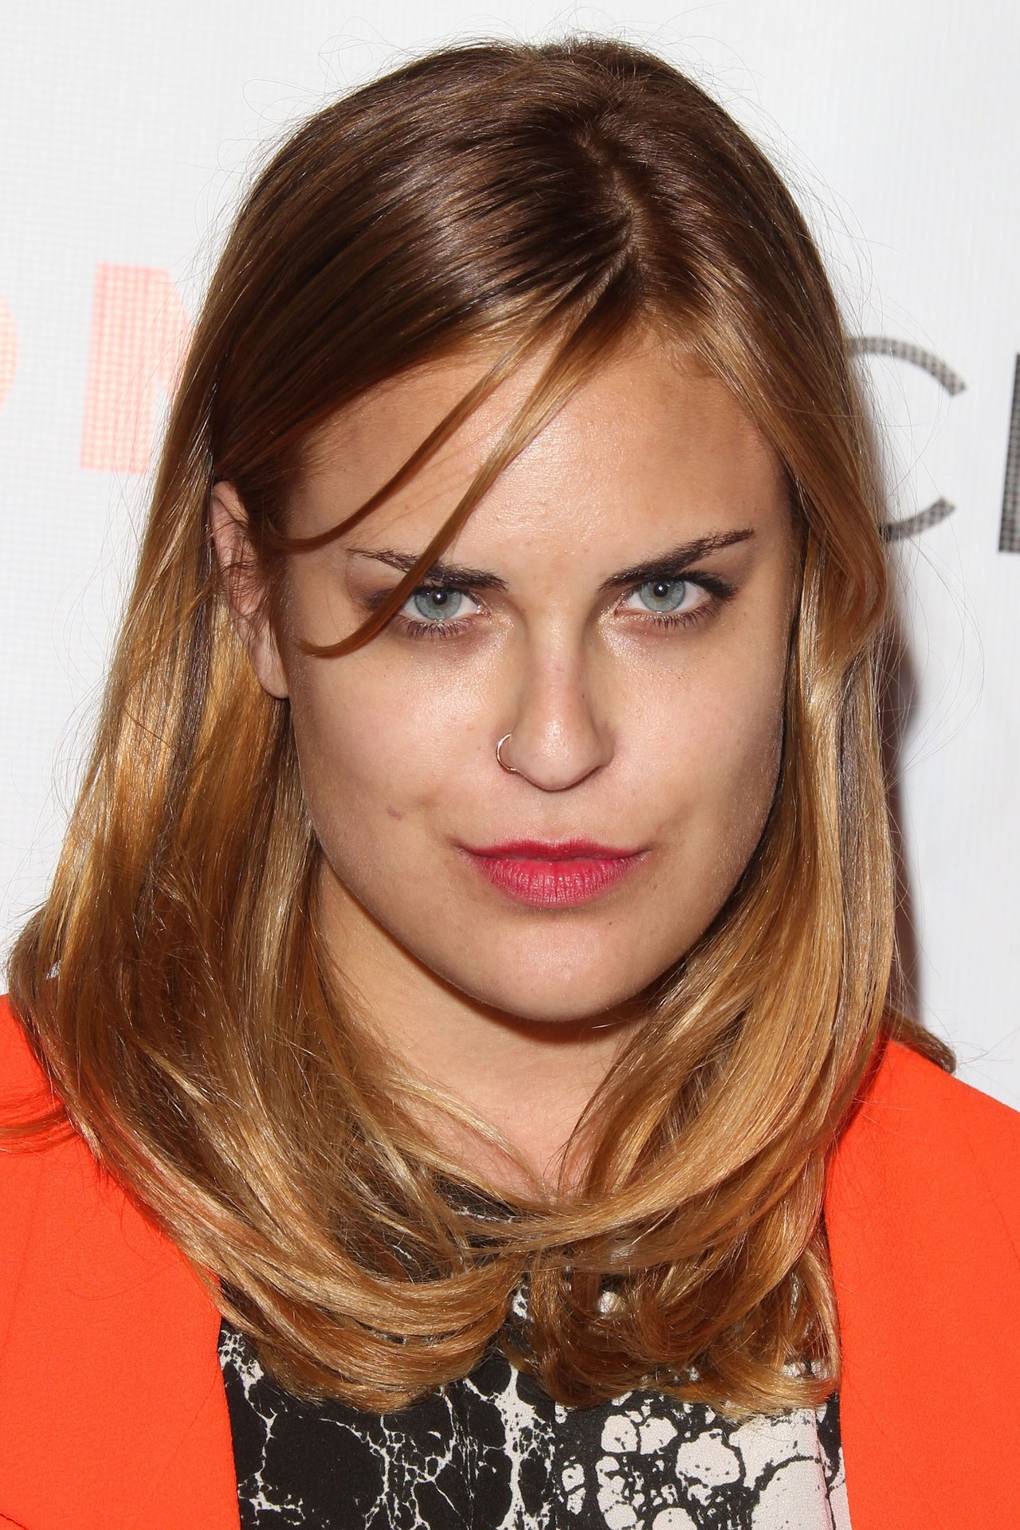 Demi Moore's daughter Tallulah Willis has shaved her head - Photos 2014 ...